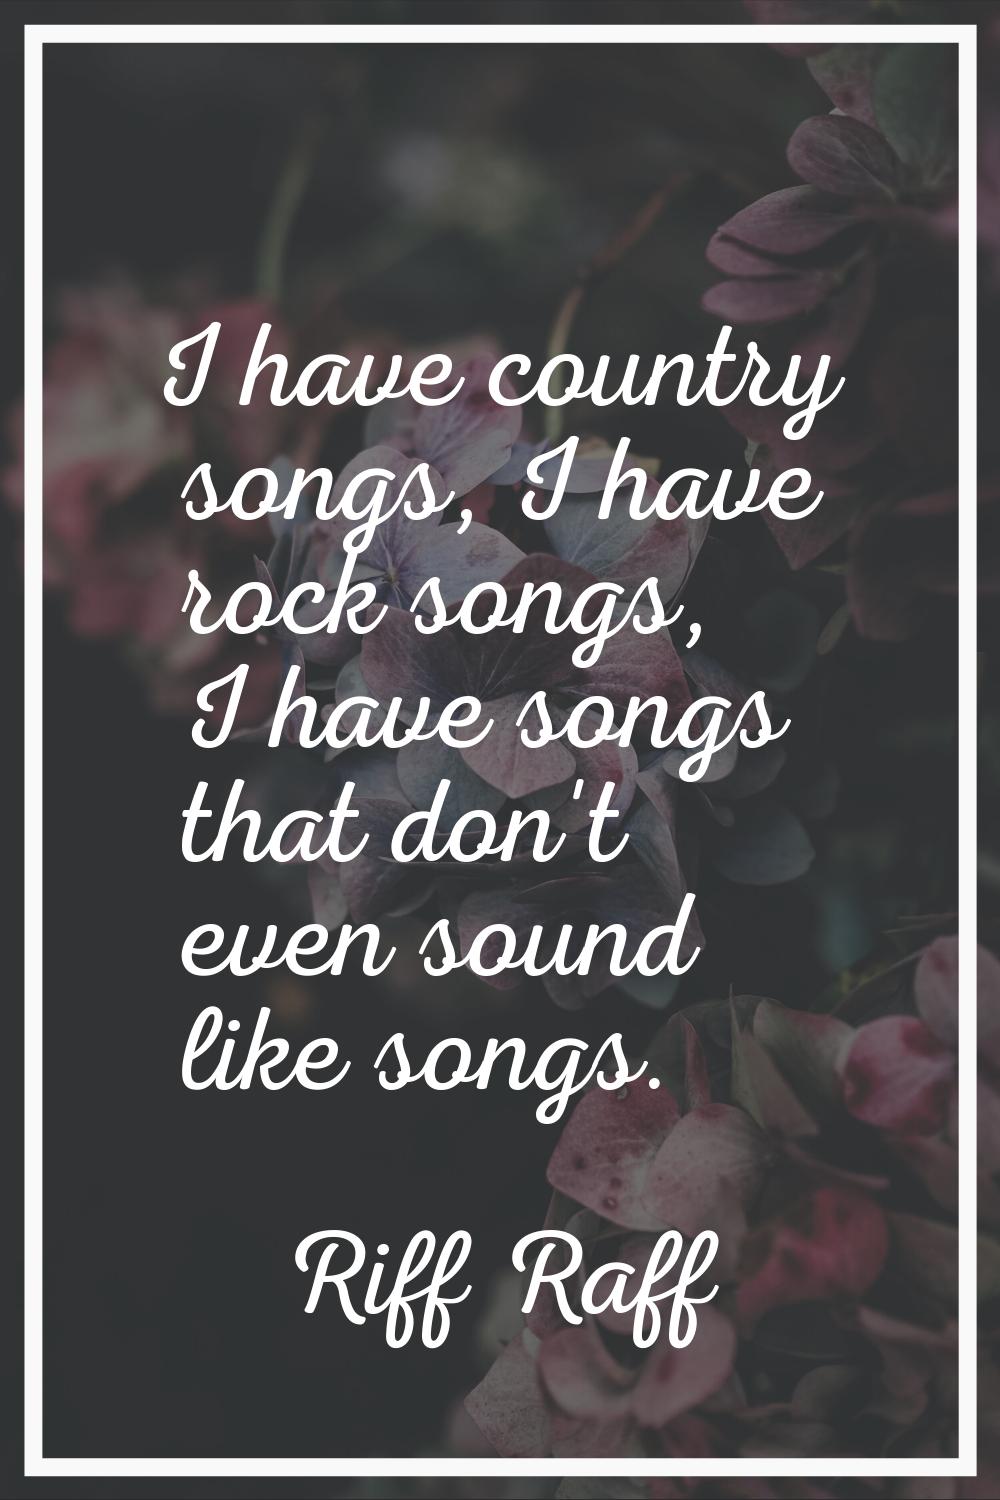 I have country songs, I have rock songs, I have songs that don't even sound like songs.